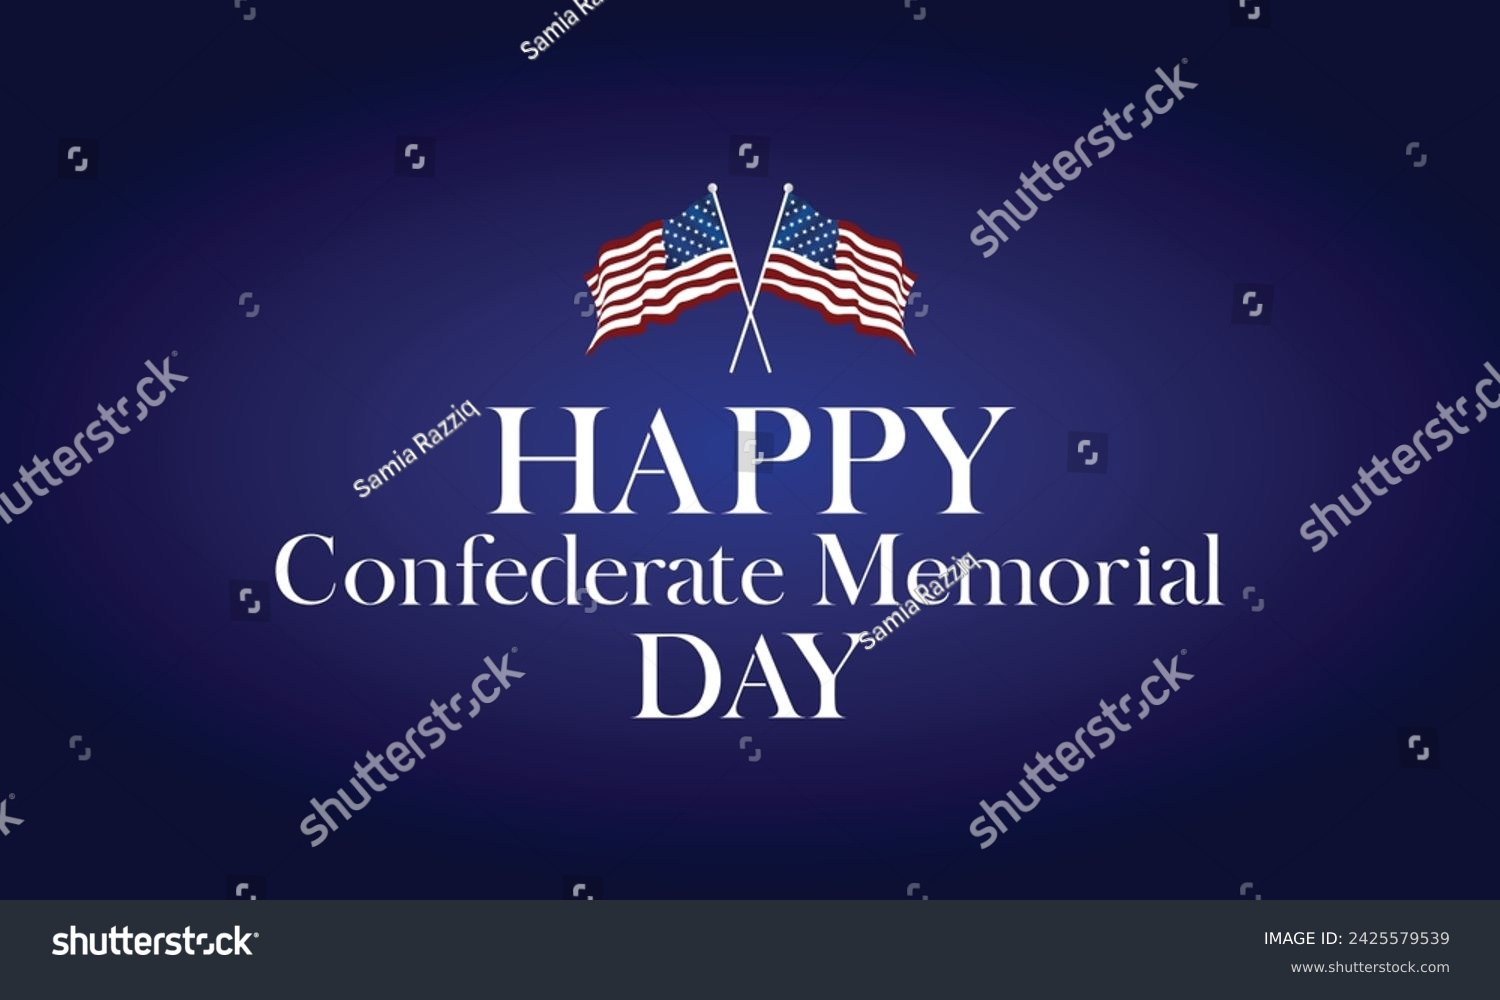 SVG of Happy Confederate Memorial Day Text With Flag And Blue Background Design svg